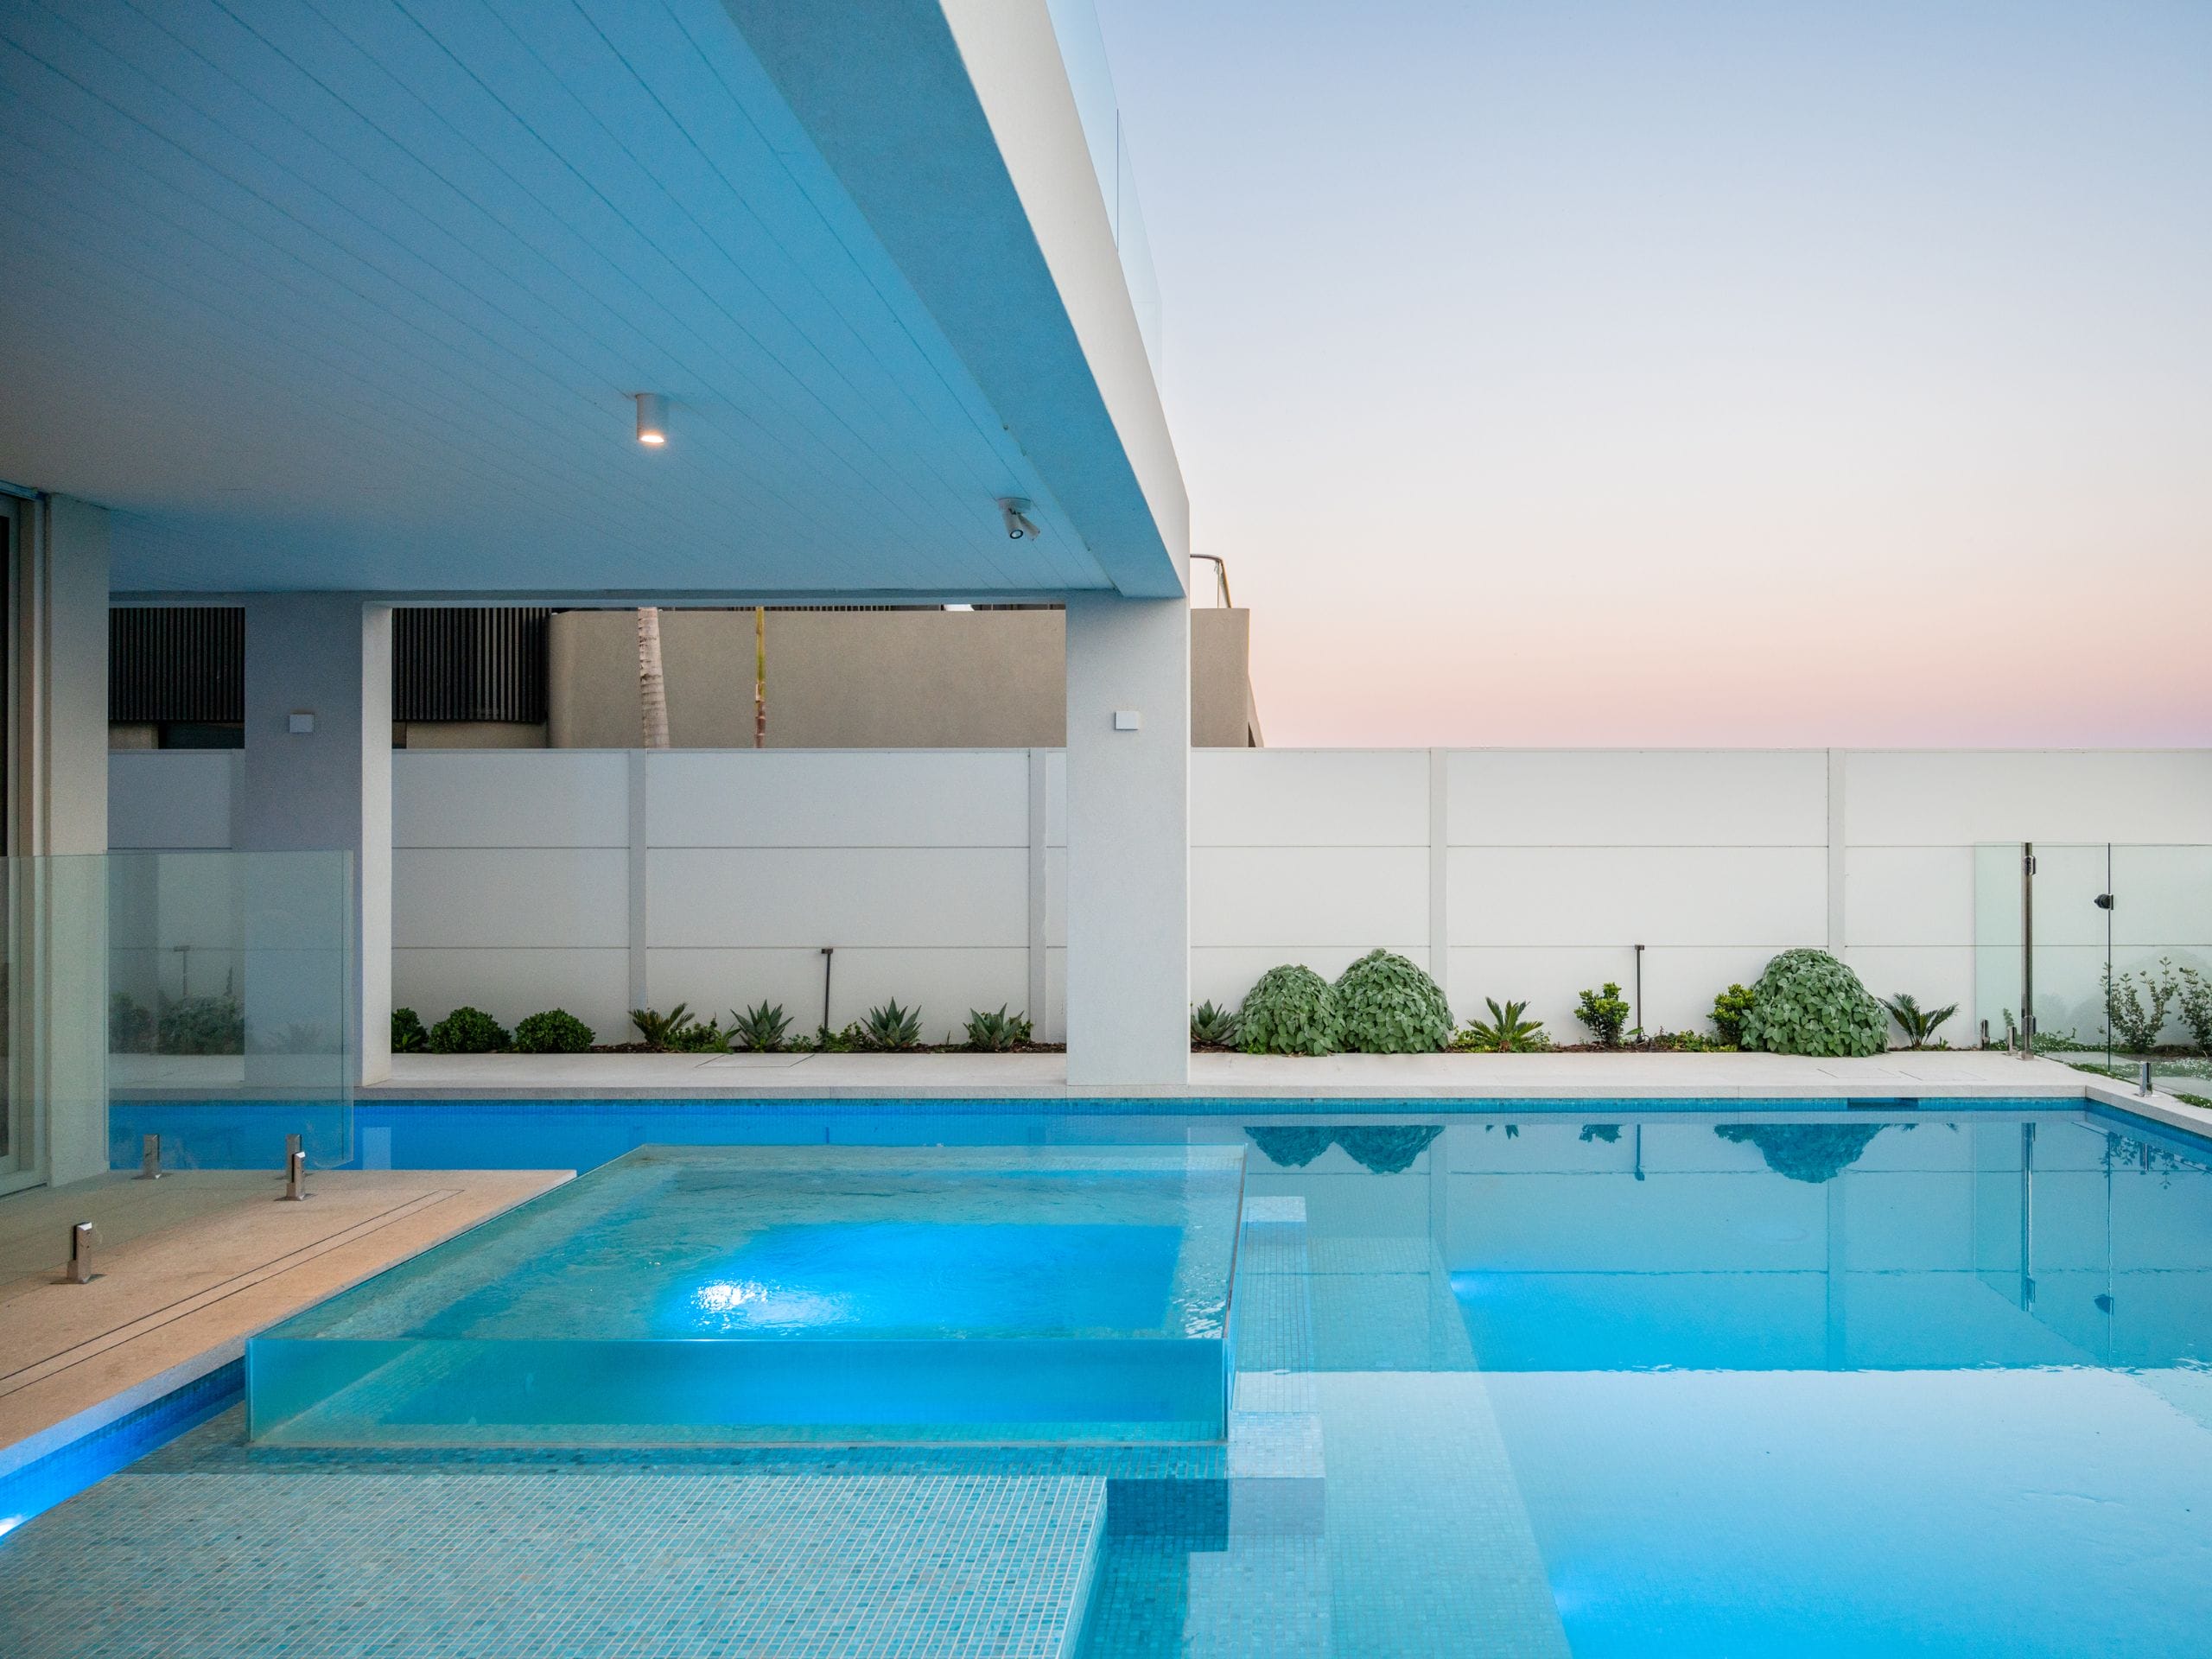 Pool landscaping doesn't need to be complicated - there are plenty of ways to elevate your styling without breaking the bank